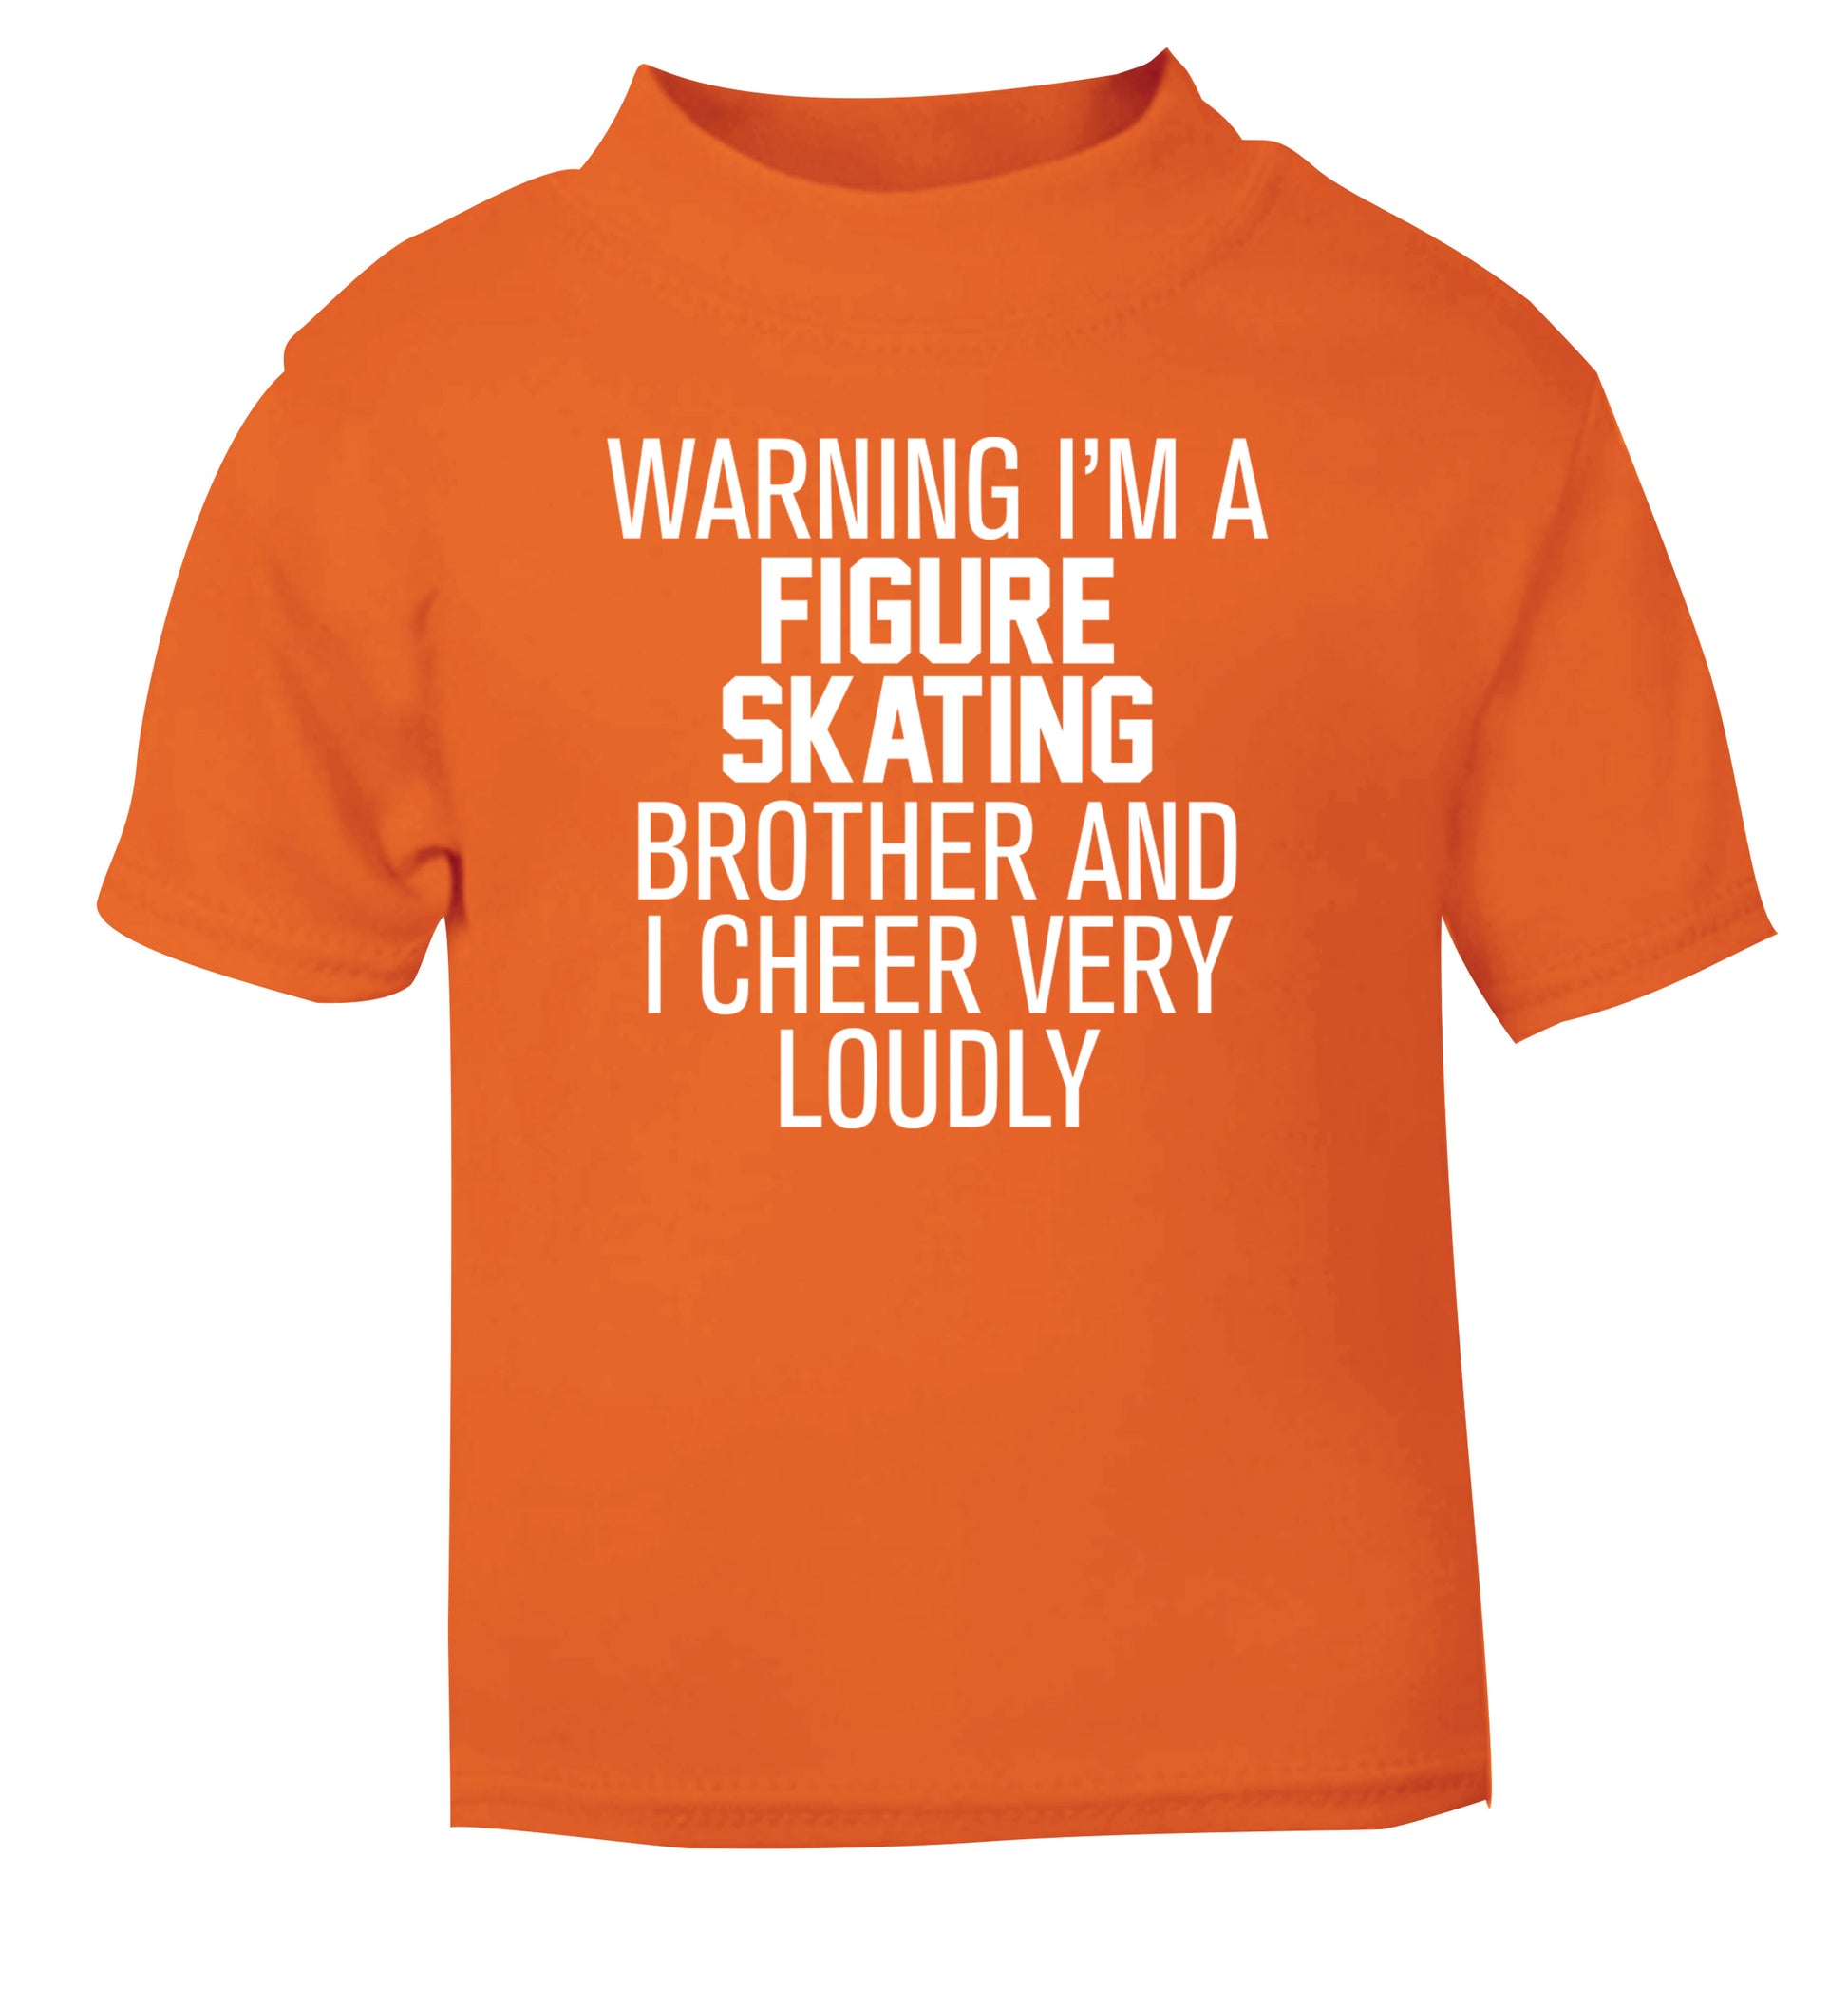 Warning I'm a figure skating brother and I cheer very loudly orange Baby Toddler Tshirt 2 Years